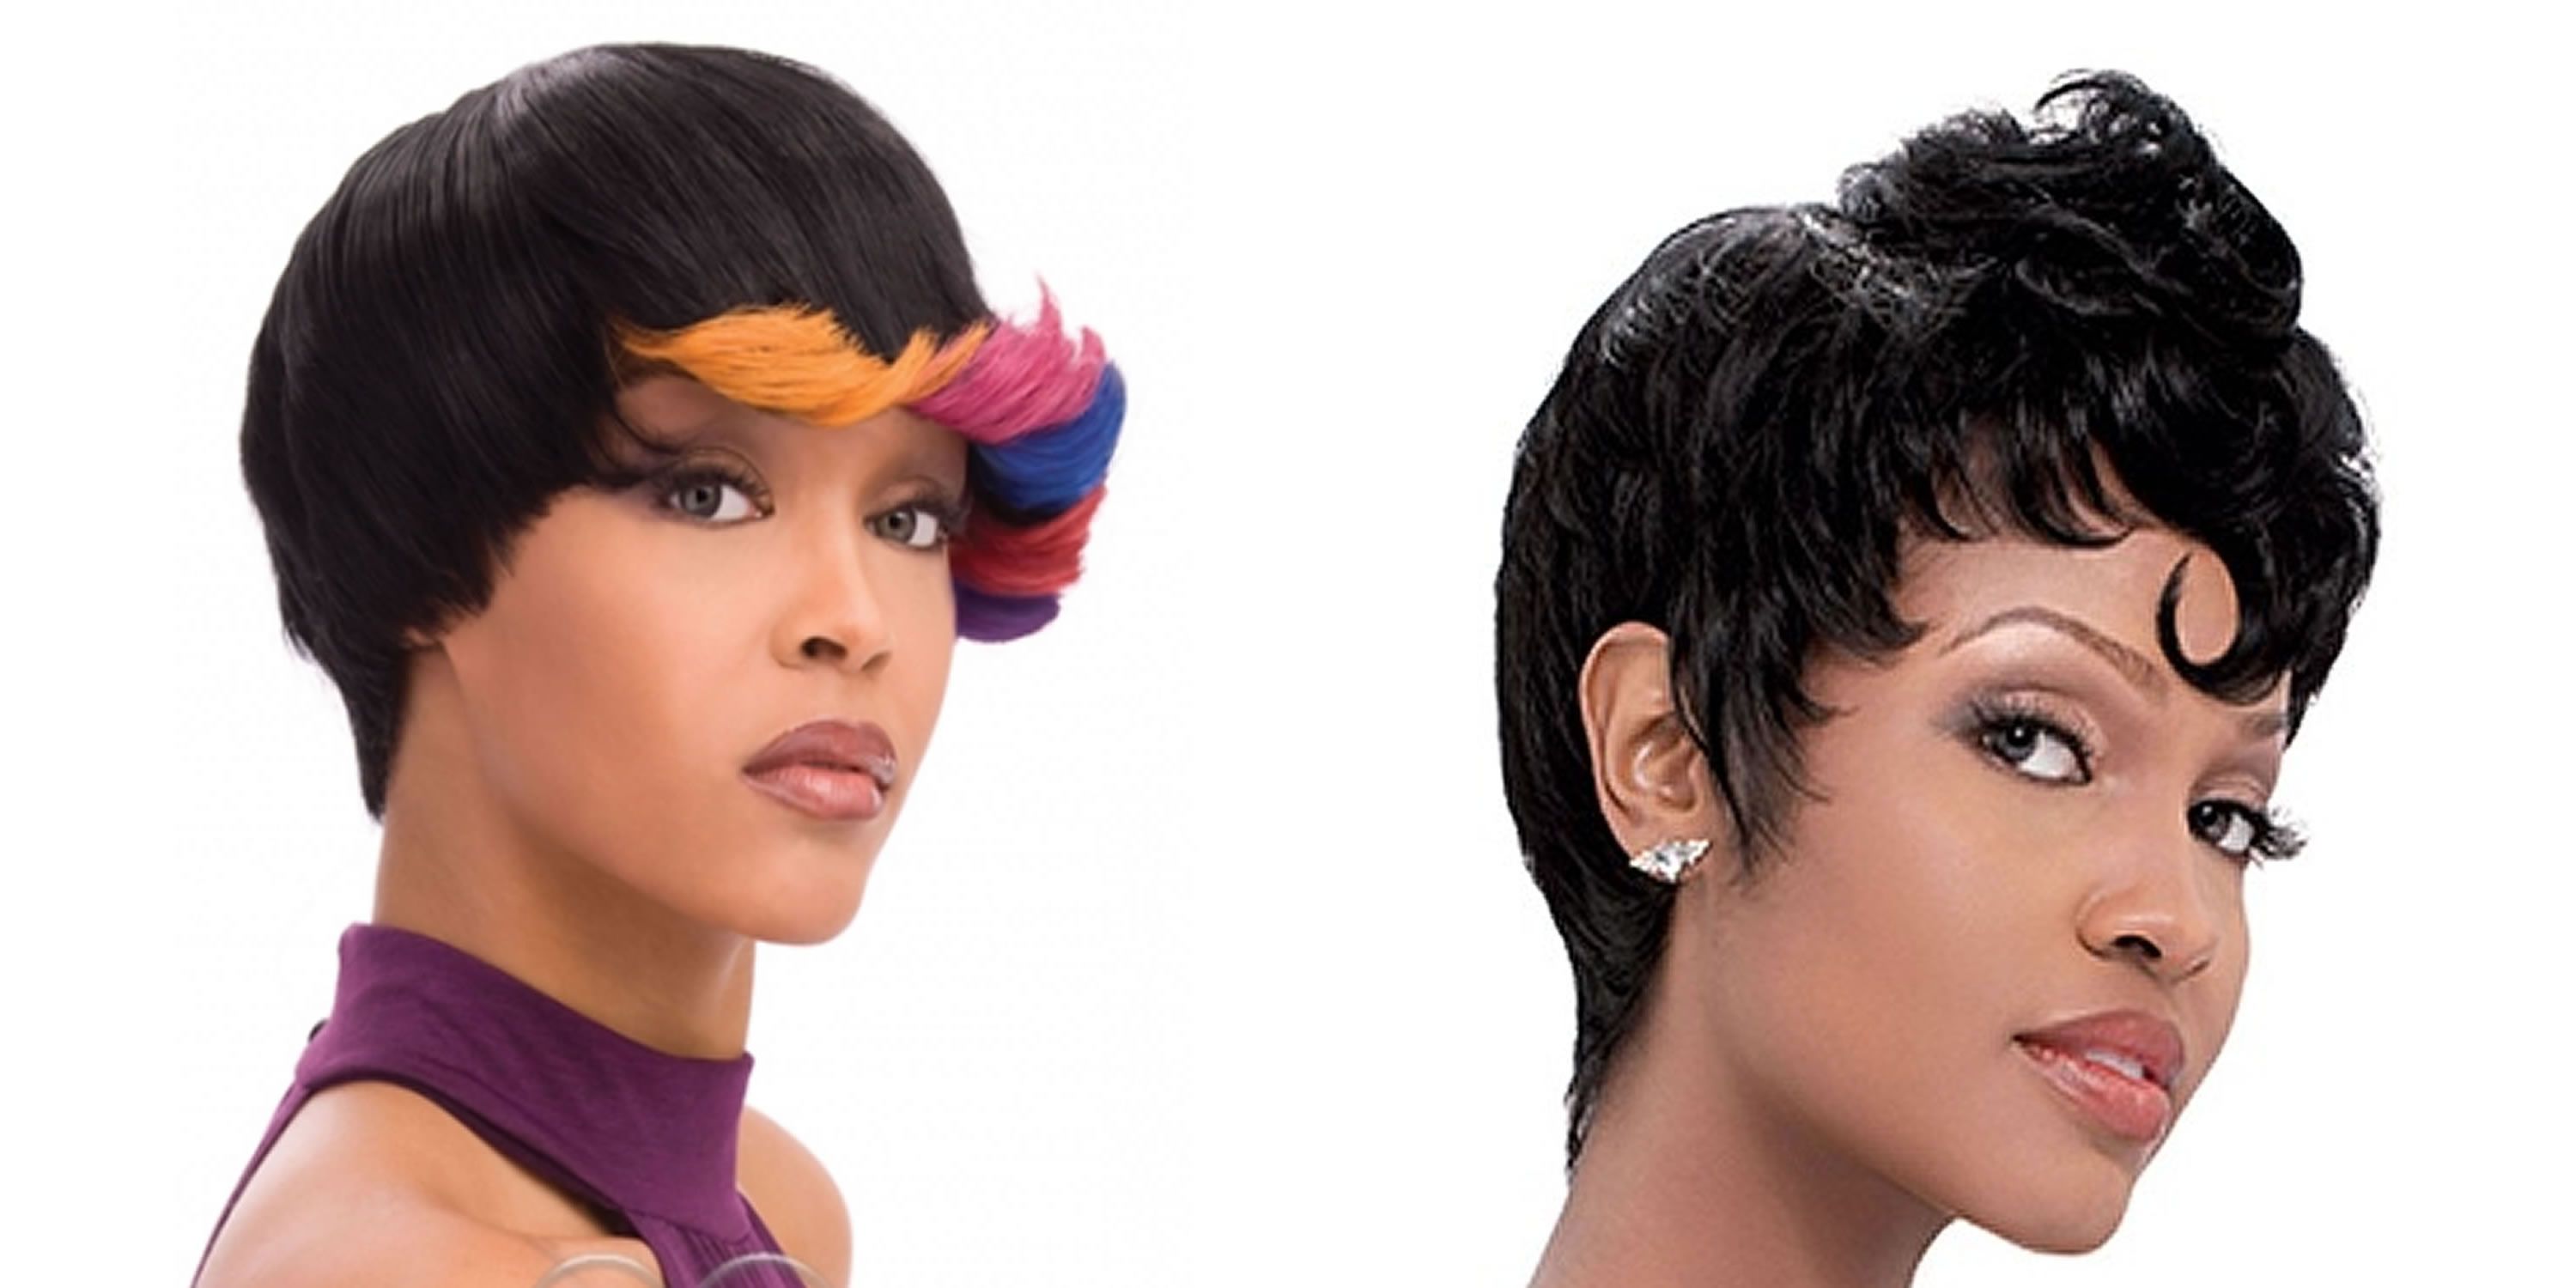 Pixie Hairstyles For Black Women – 60 Cool Short Haircuts For 2017 Pertaining To Short Haircuts Black Women (View 14 of 25)